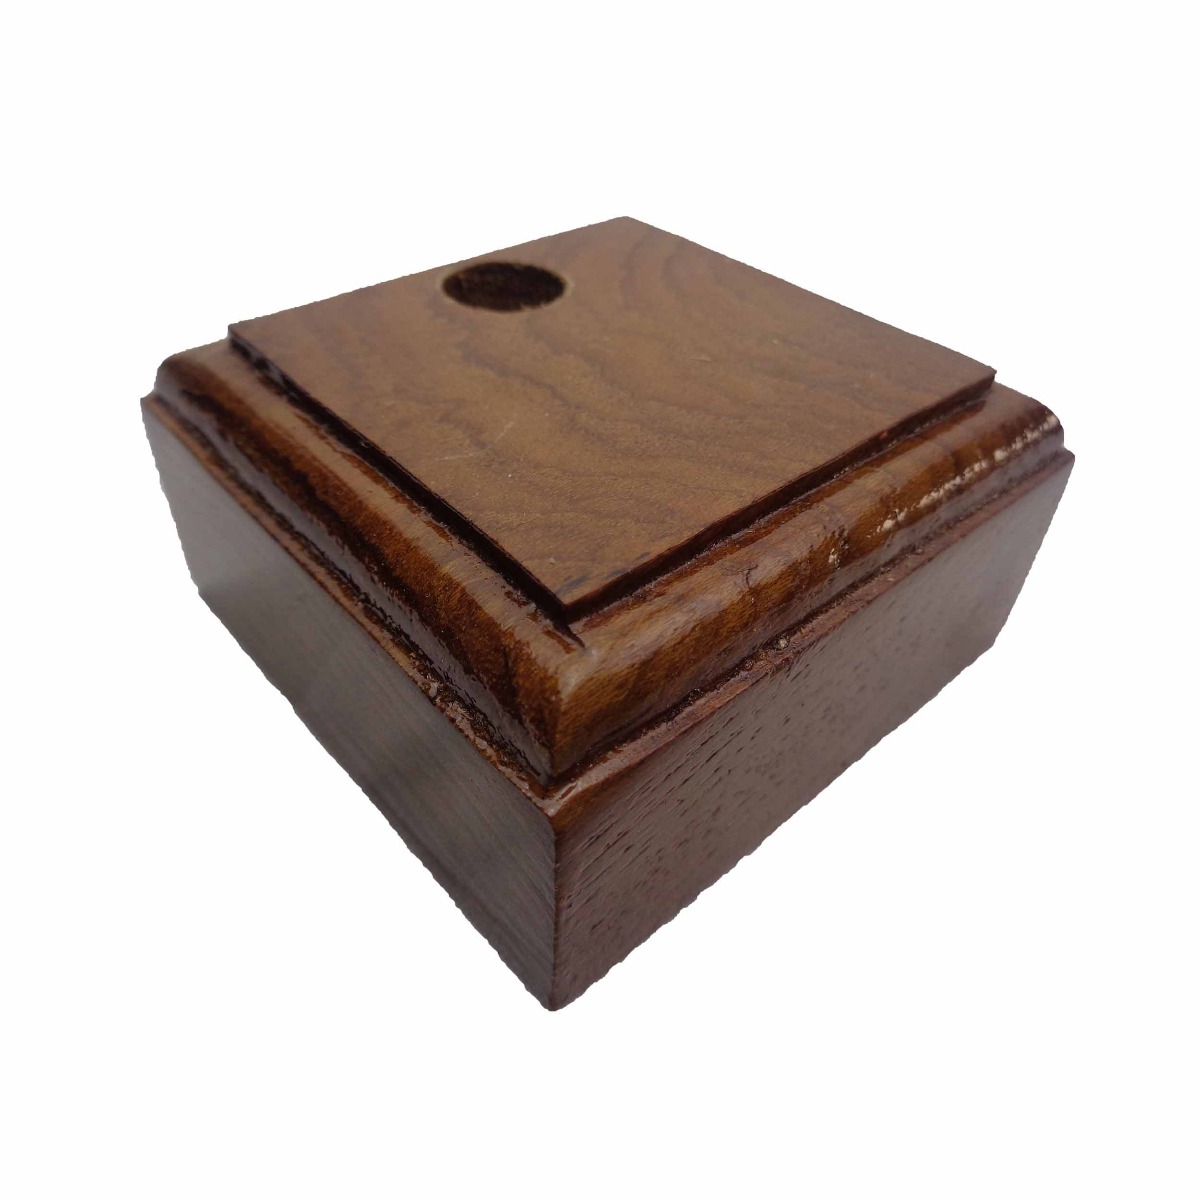 Penhouse.in Model: 15344 Brown color  square shape wooden penstand with Single pen holder